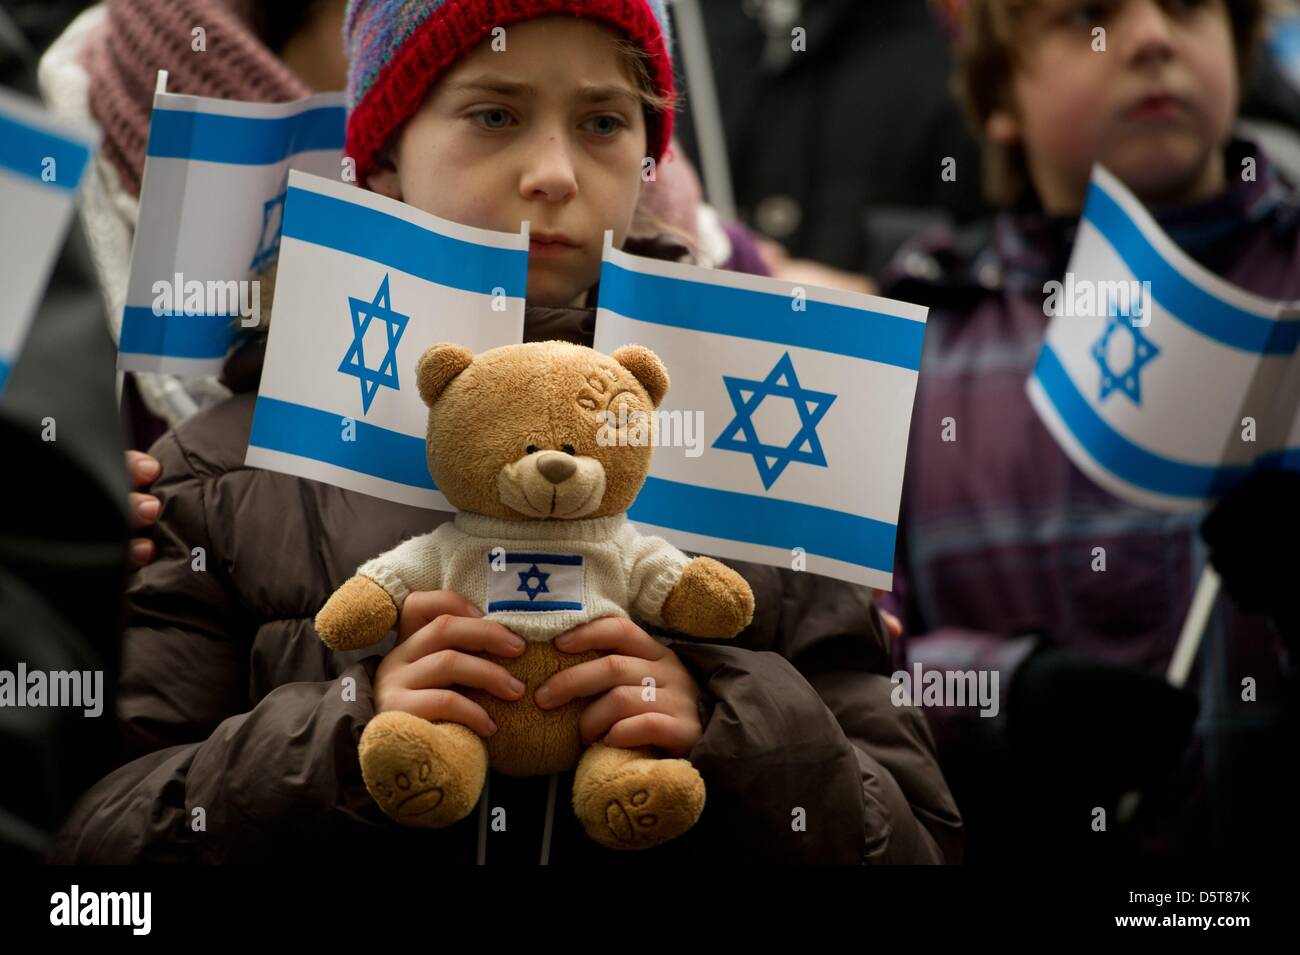 Hannah (9) from Berlin holds flags and a teddy bear during a rally demonstrating solidarity with Israel in Berlin, Germany, 18 November 2012. The rally organized by the Mideast Freedom Forum Berlin wishes to call attention to the situation of Israeli civilians. Photo: SEBASTIAN KAHNERT Stock Photo